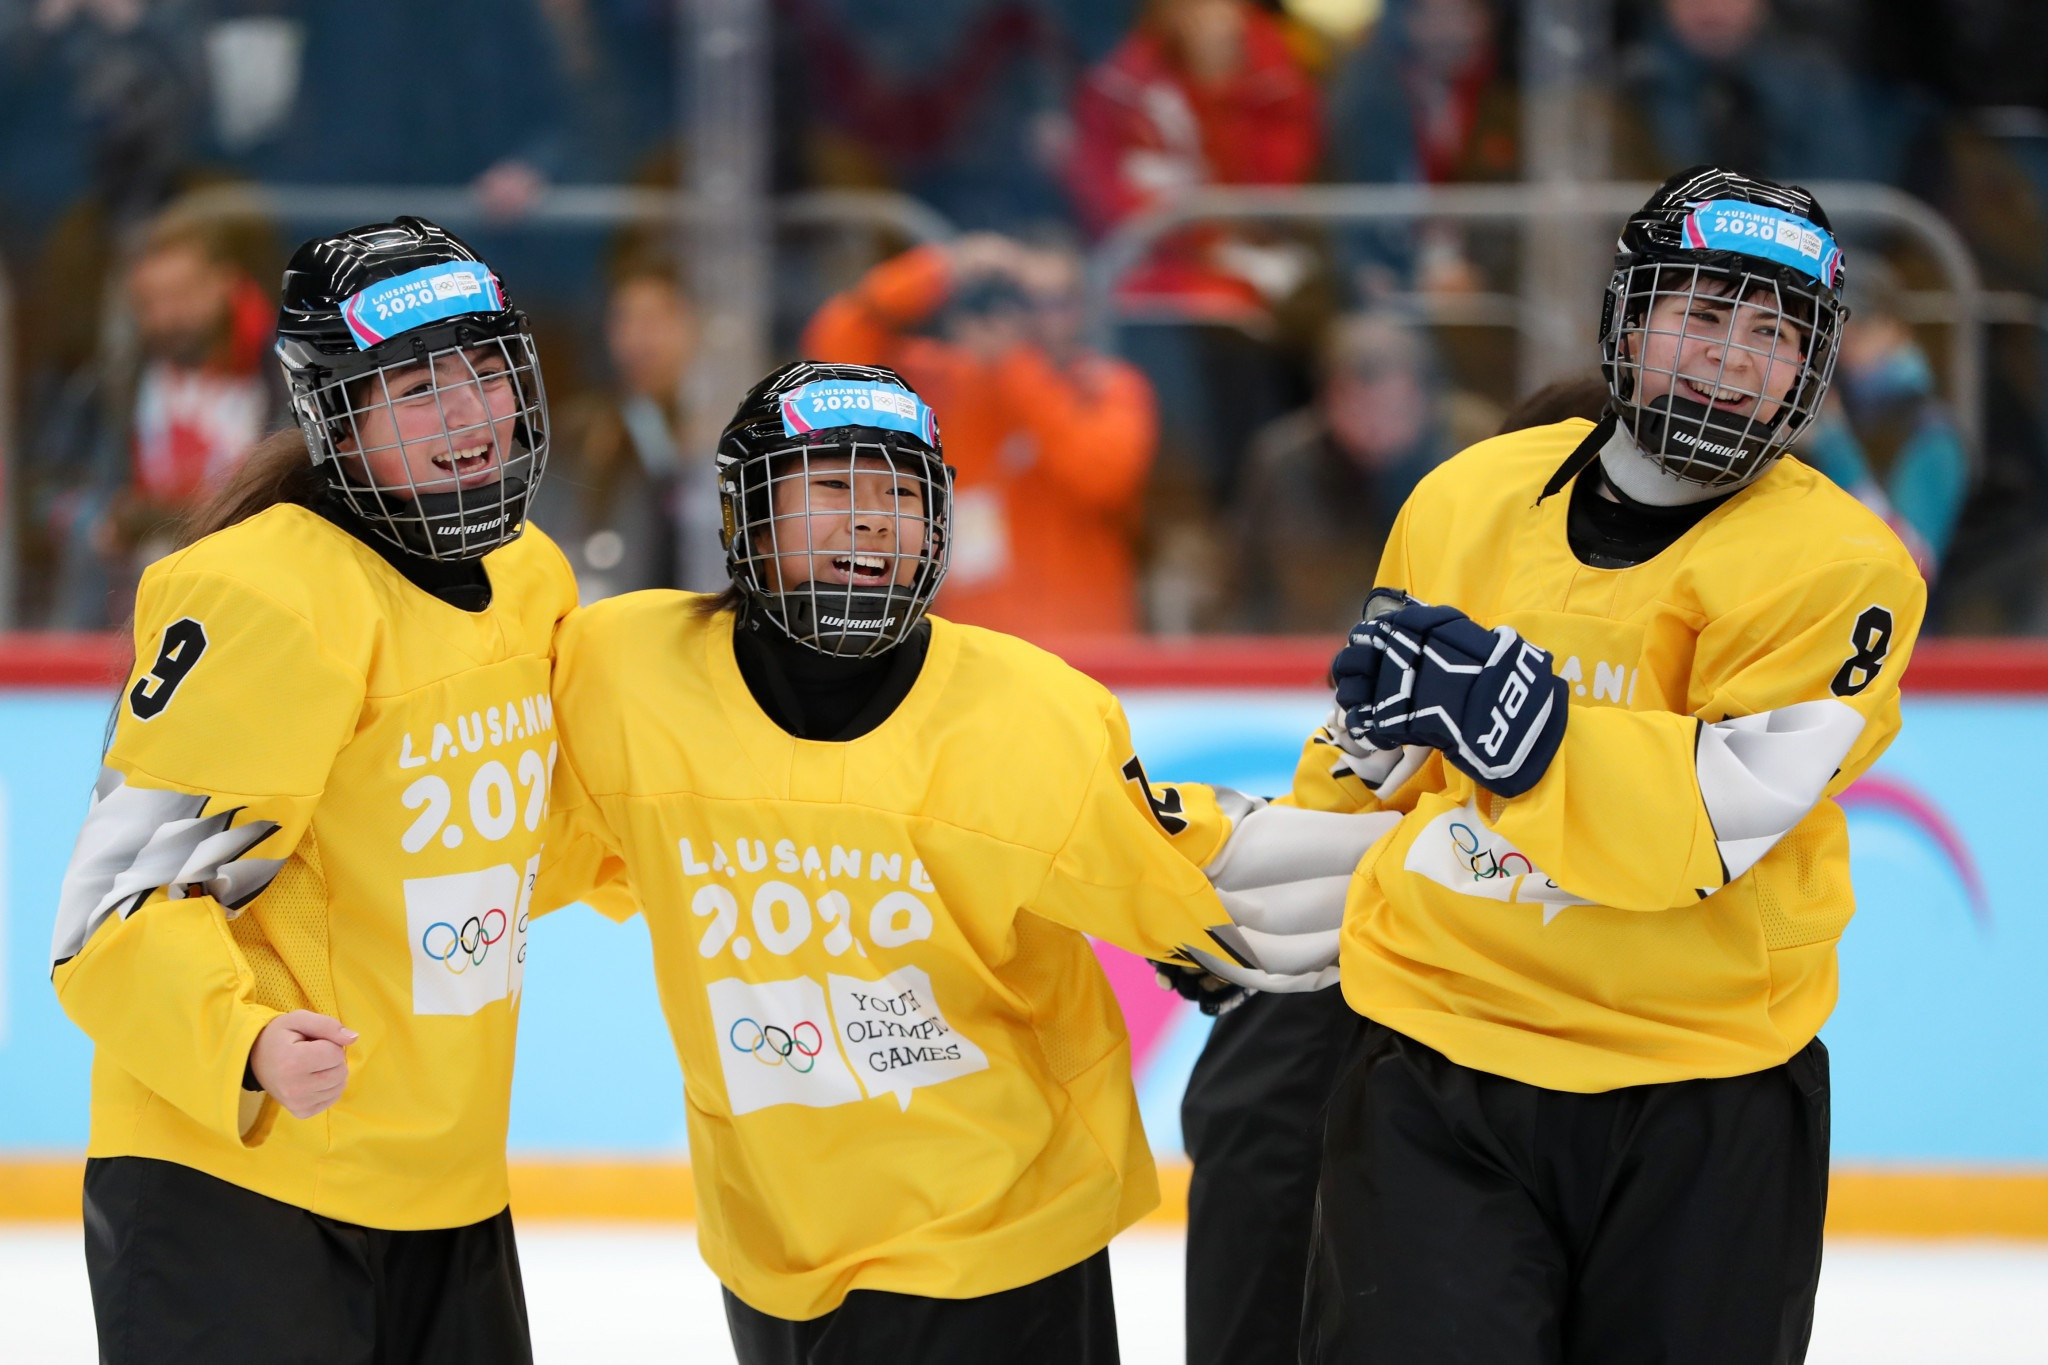 A mixed-nationality 3x3 ice hockey discipline made its debut at Lausanne 2020 ©Getty Images